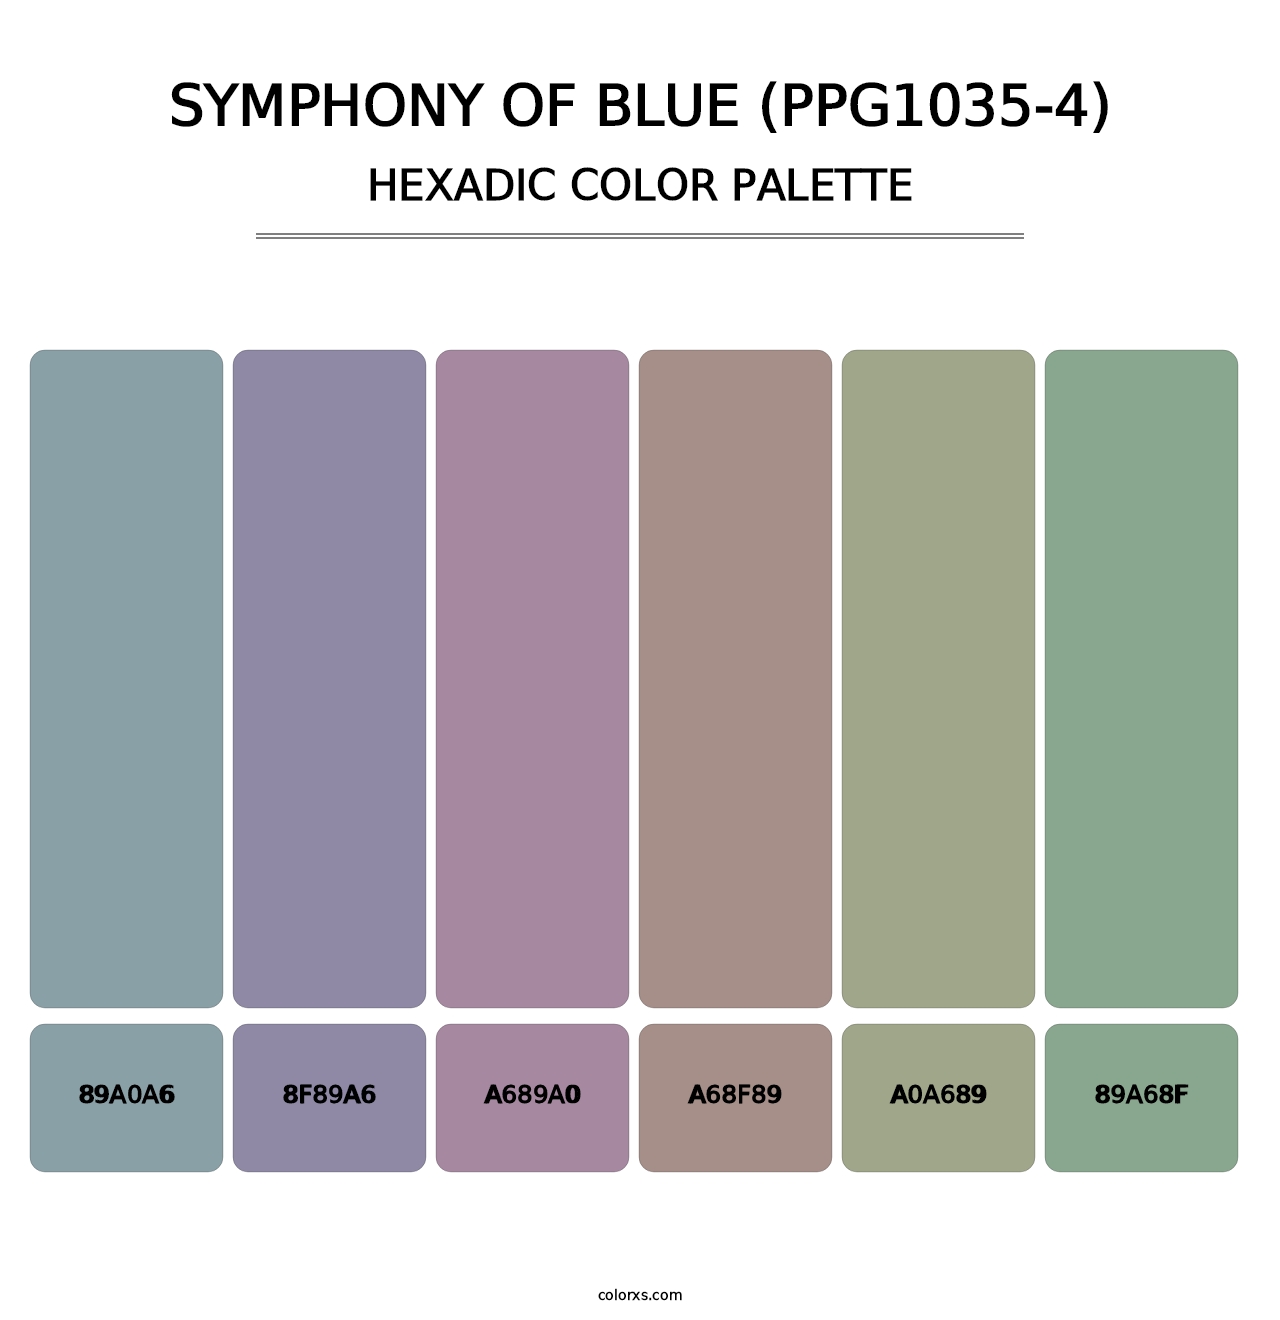 Symphony Of Blue (PPG1035-4) - Hexadic Color Palette